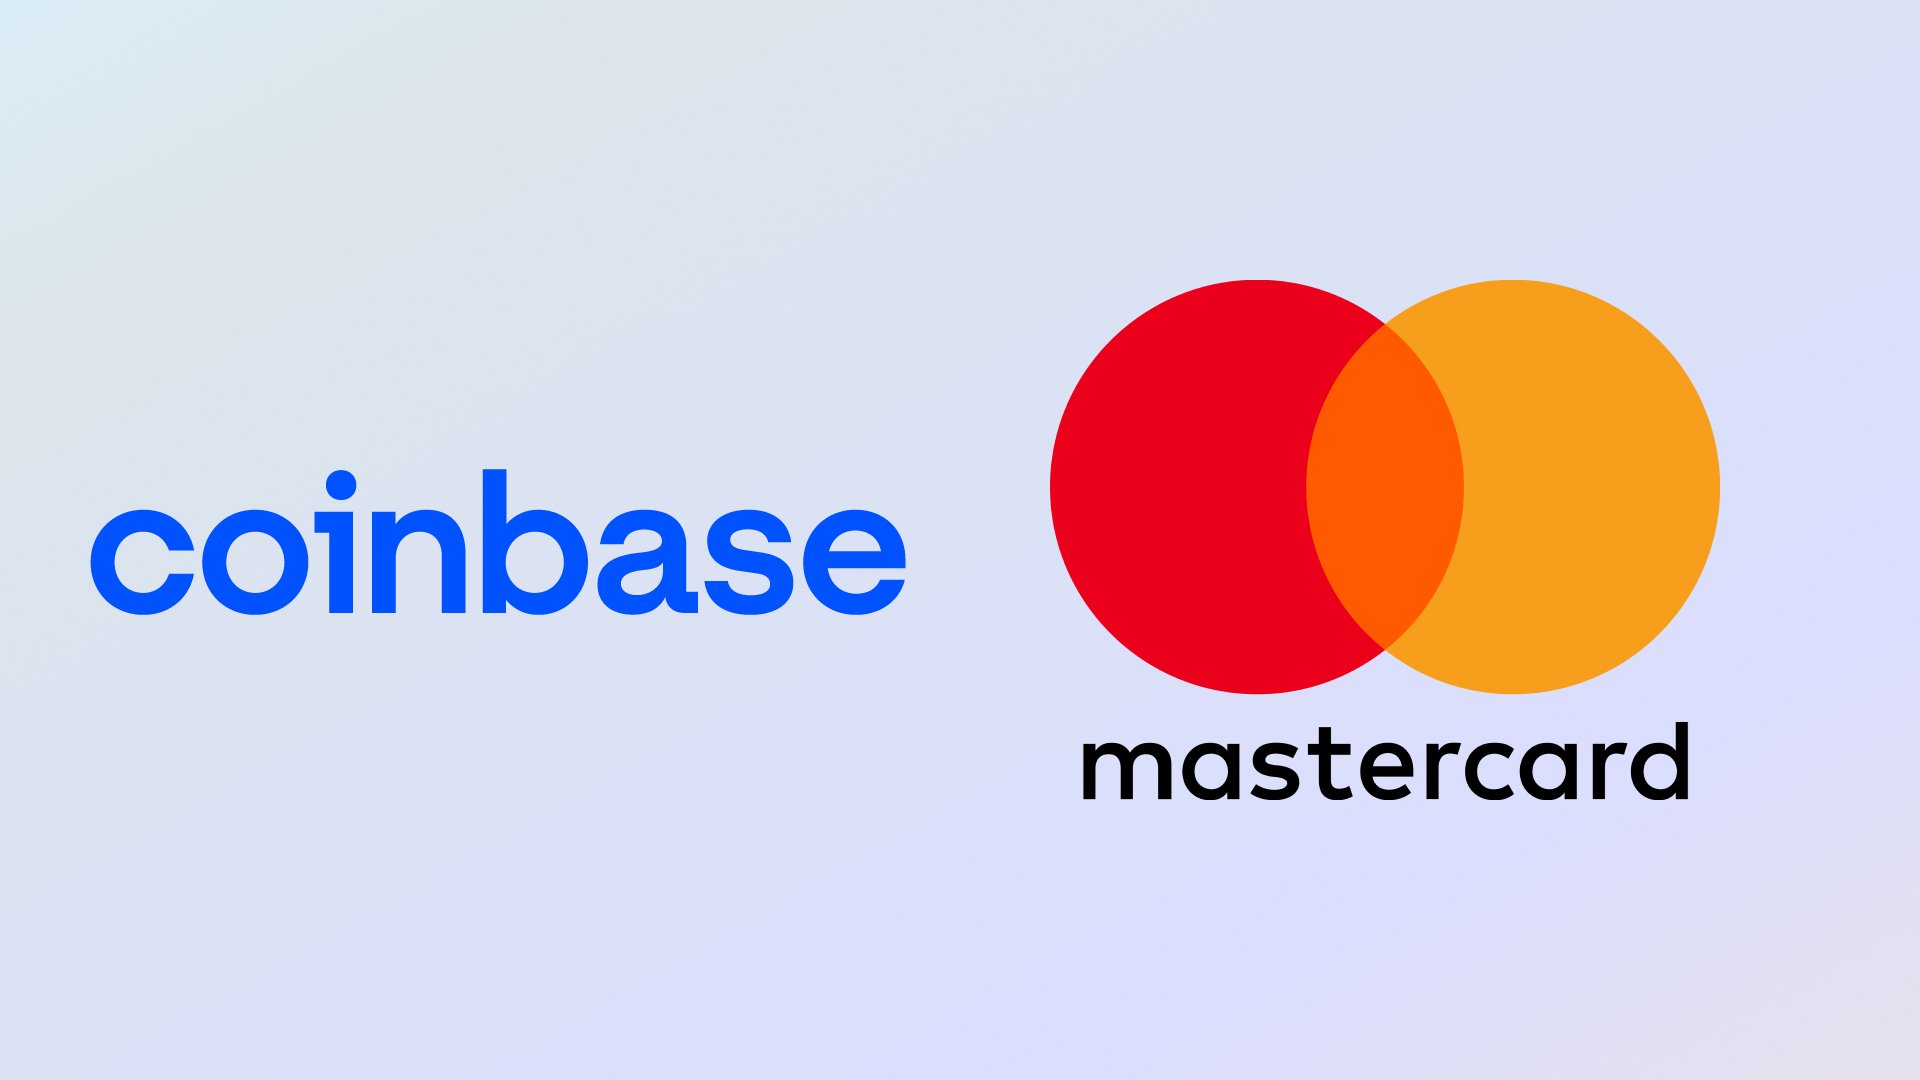 Coinbase Partners Mastercard To Enable Useage of Credit Card on NFT Marketplace-Investors King